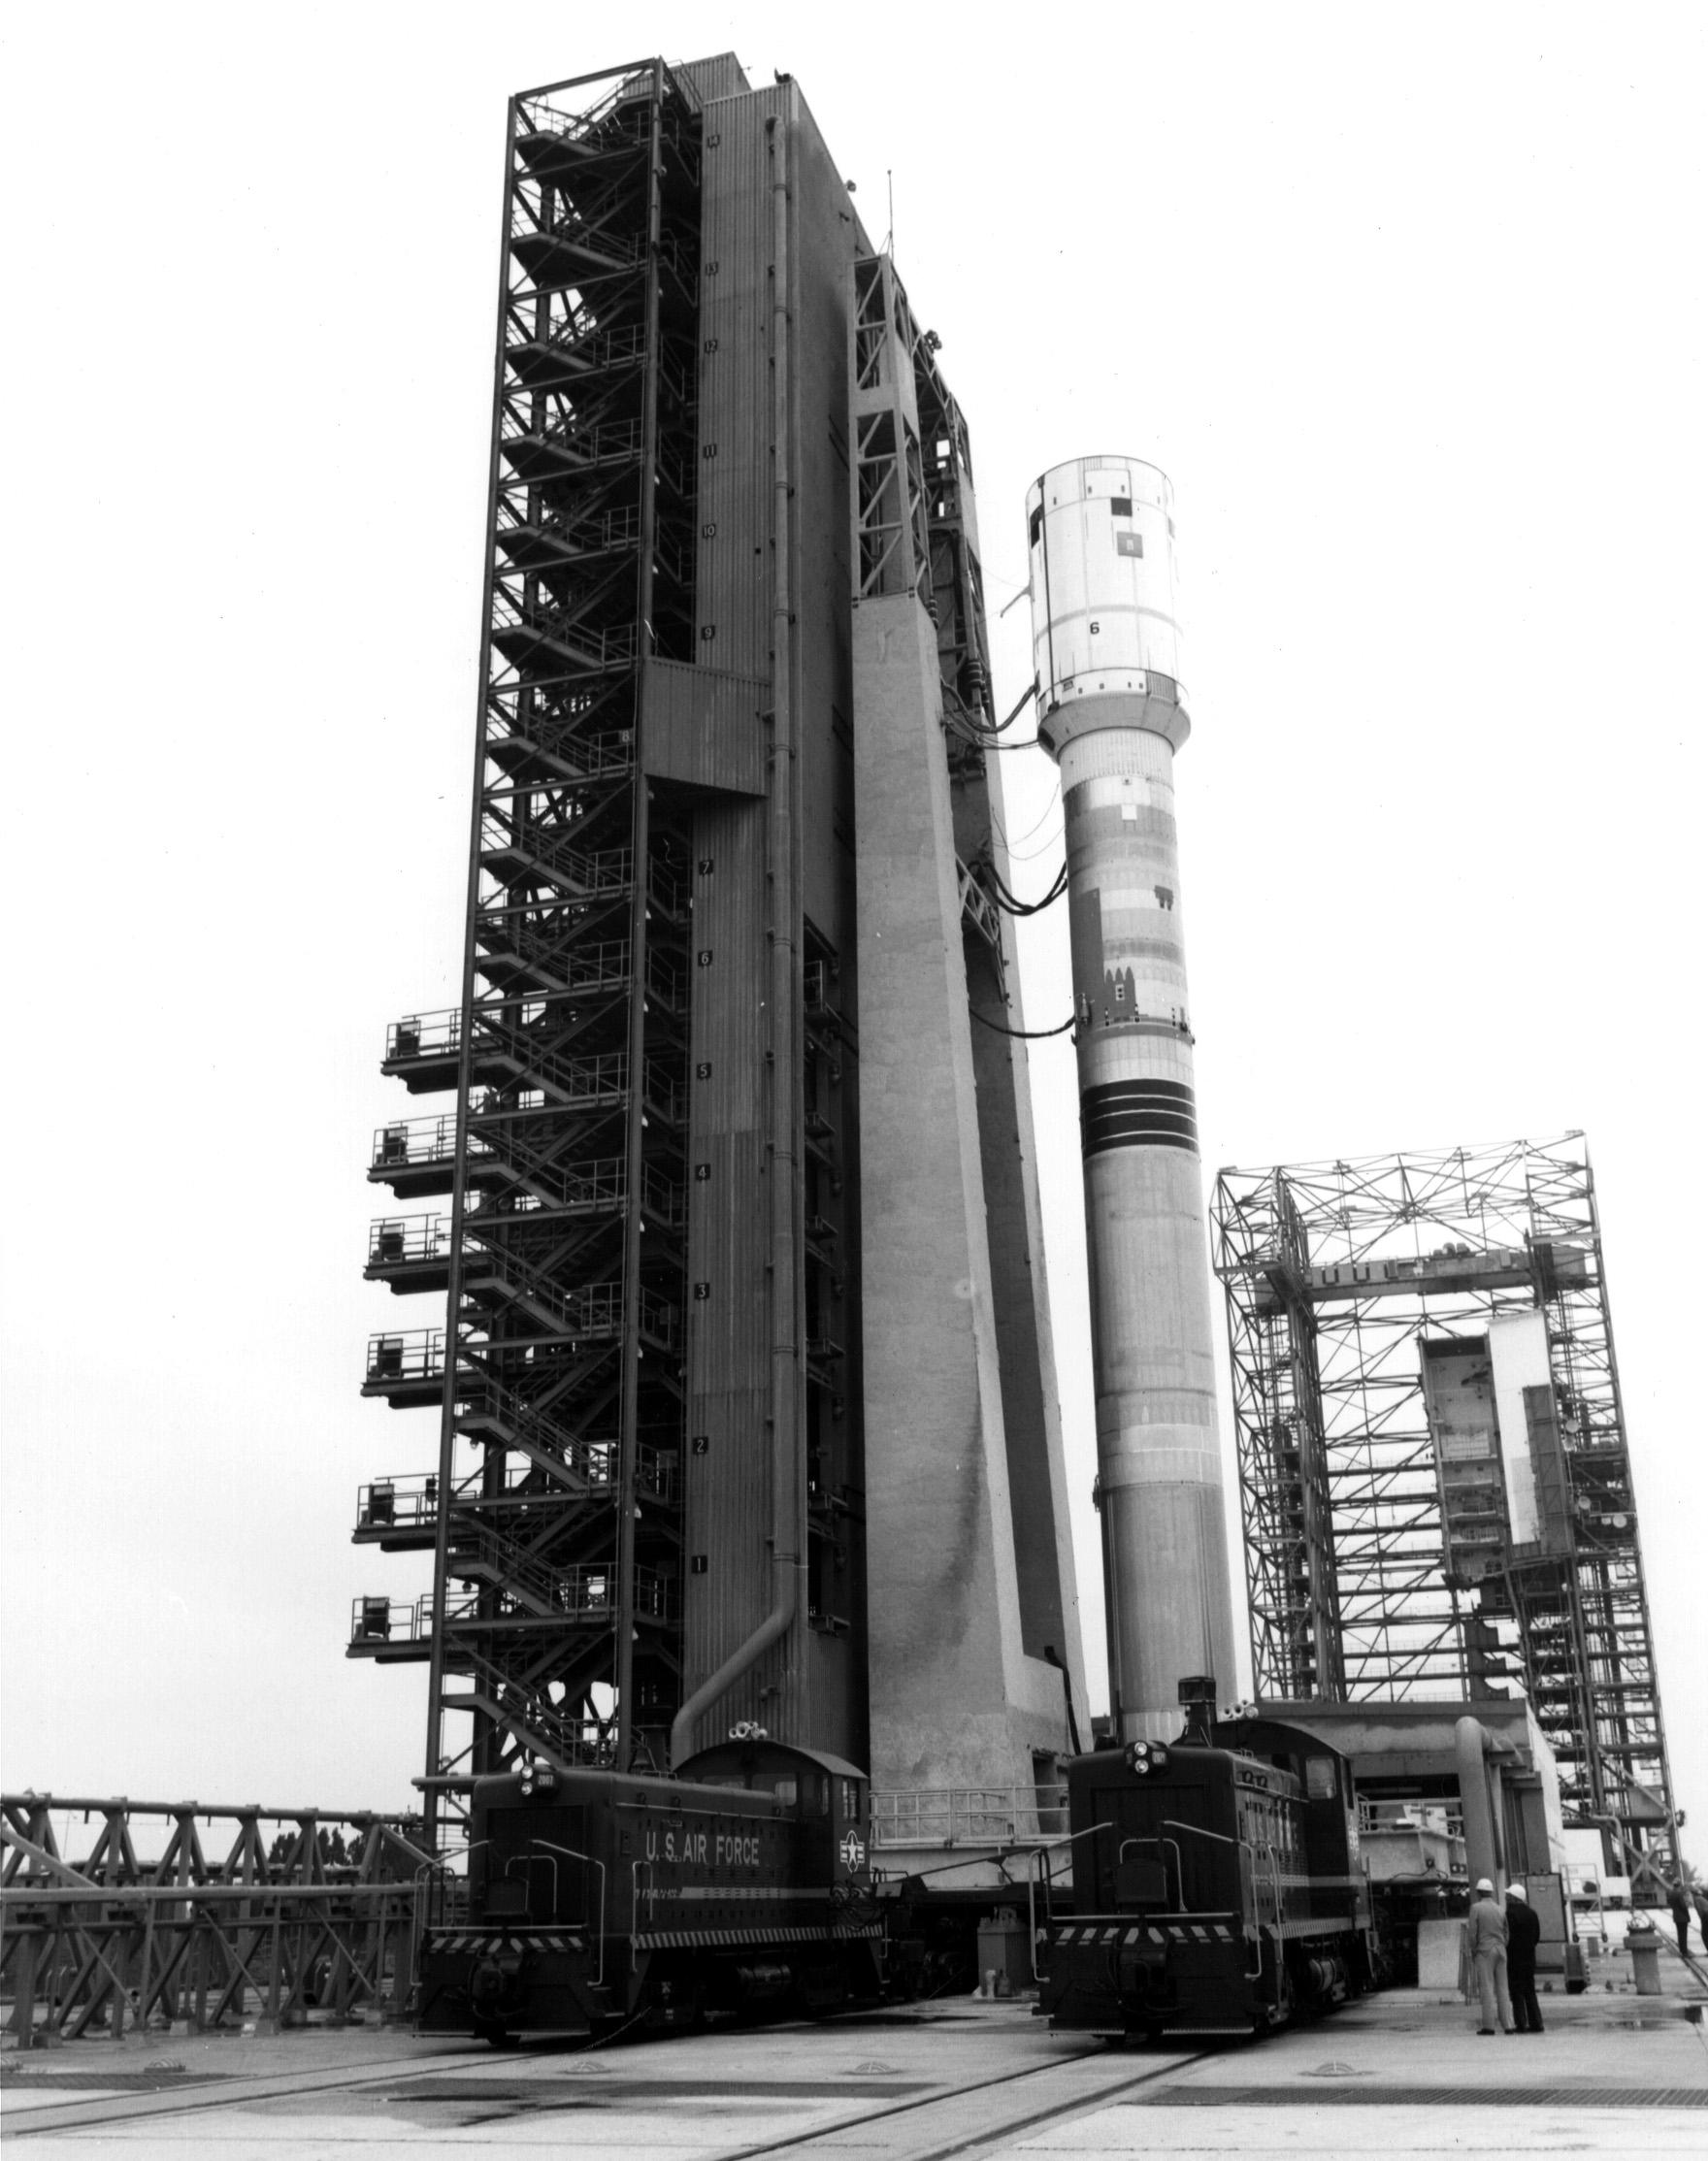 The Titan/Centaur-6 launch vehicle, carrying Voyager 1